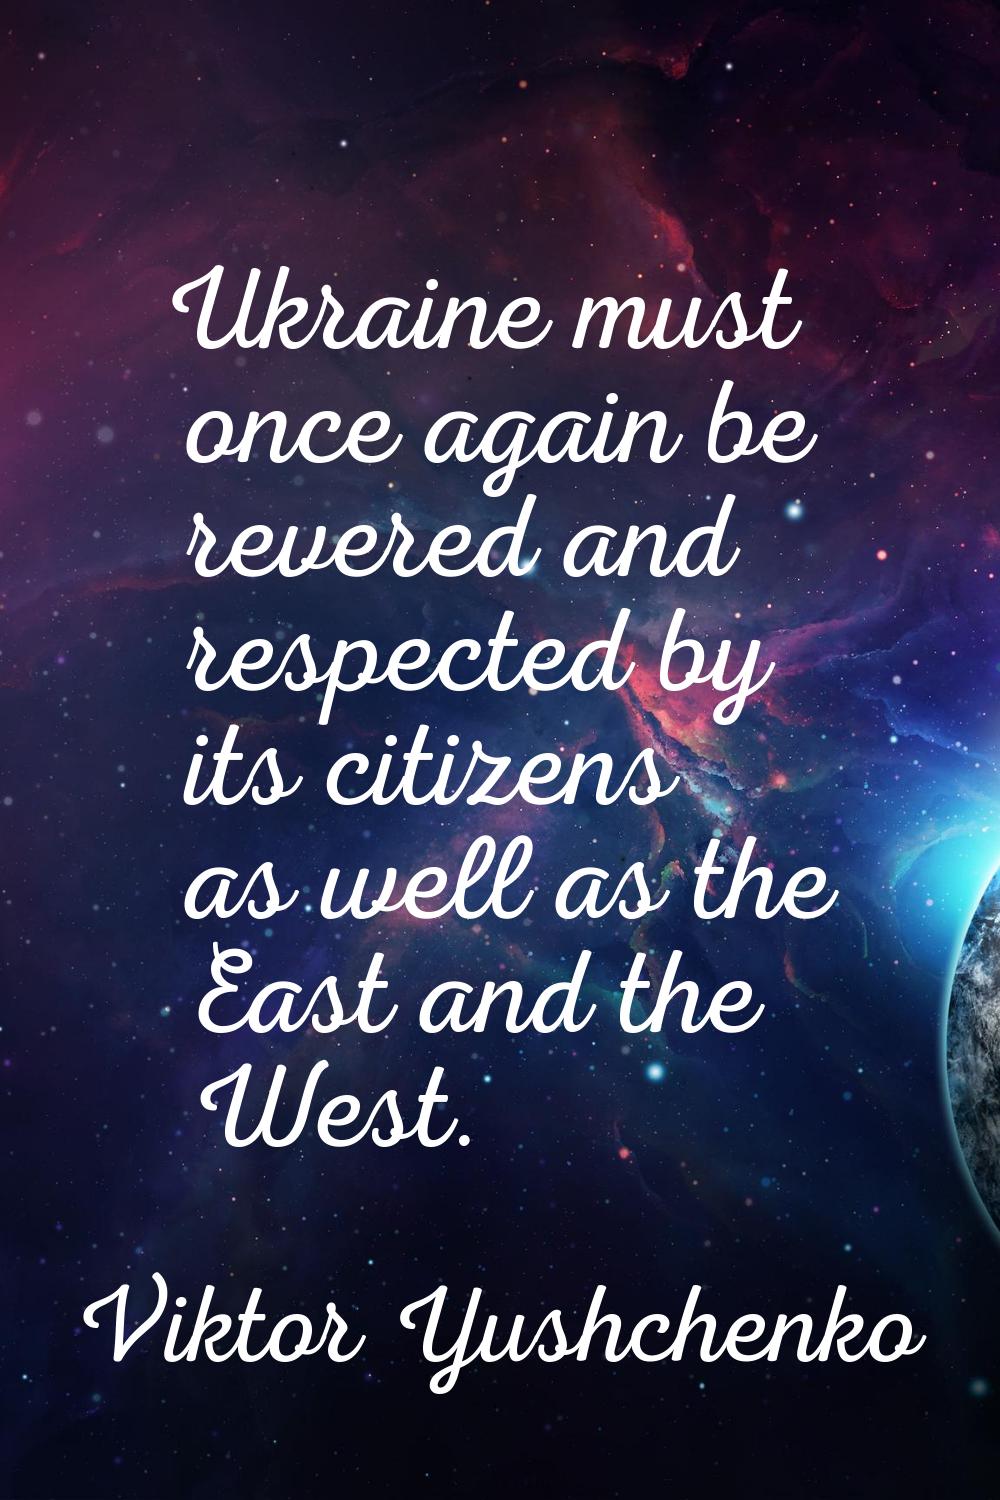 Ukraine must once again be revered and respected by its citizens as well as the East and the West.